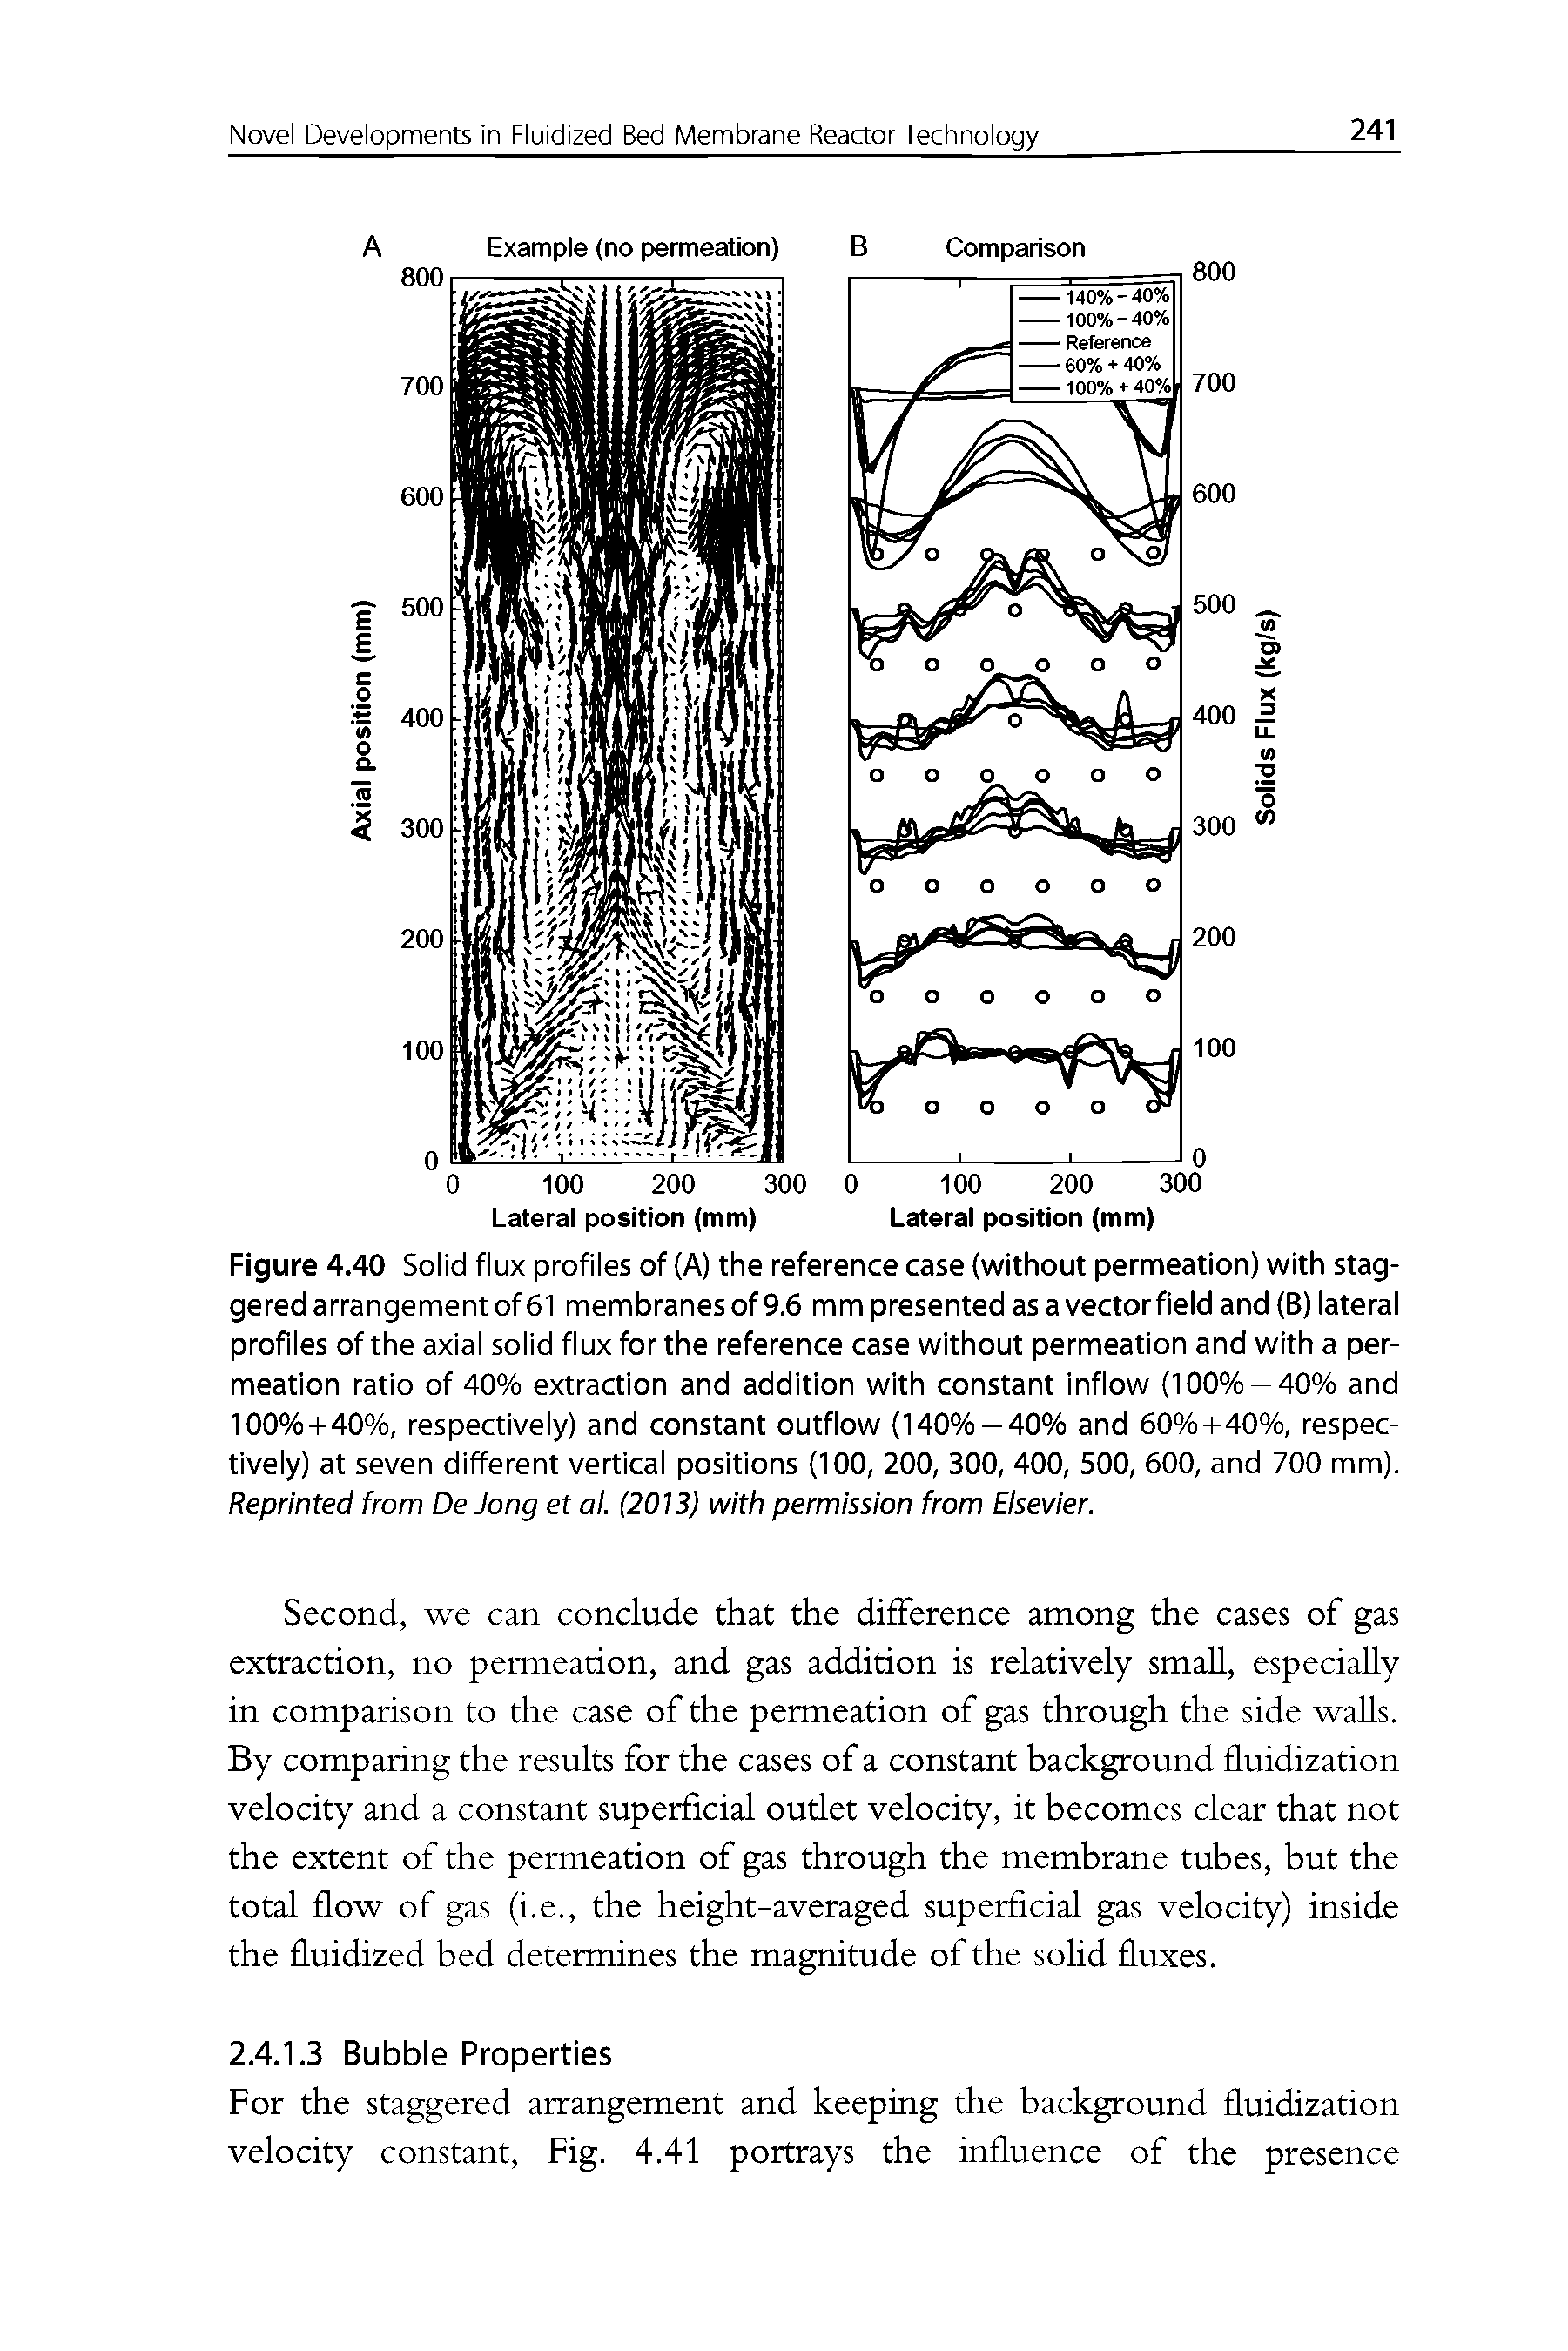 Figure 4.40 Solid flux profiles of (A) the reference case (without permeation) with staggered arrangement of 61 membranes of 9.6 mm presented as a vector fieid and (B) iaterai profiles of the axial solid flux for the reference case without permeation and with a permeation ratio of 40% extraction and addition with constant inflow (100% —40% and 100%-f40%, respectively) and constant outflow (140%-40% and 60%+40%, respectively) at seven different vertical positions (100, 200, 300, 400, 500, 600, and 700 mm). Reprinted from De Jong et al. (2013) with permission from Eisevier.